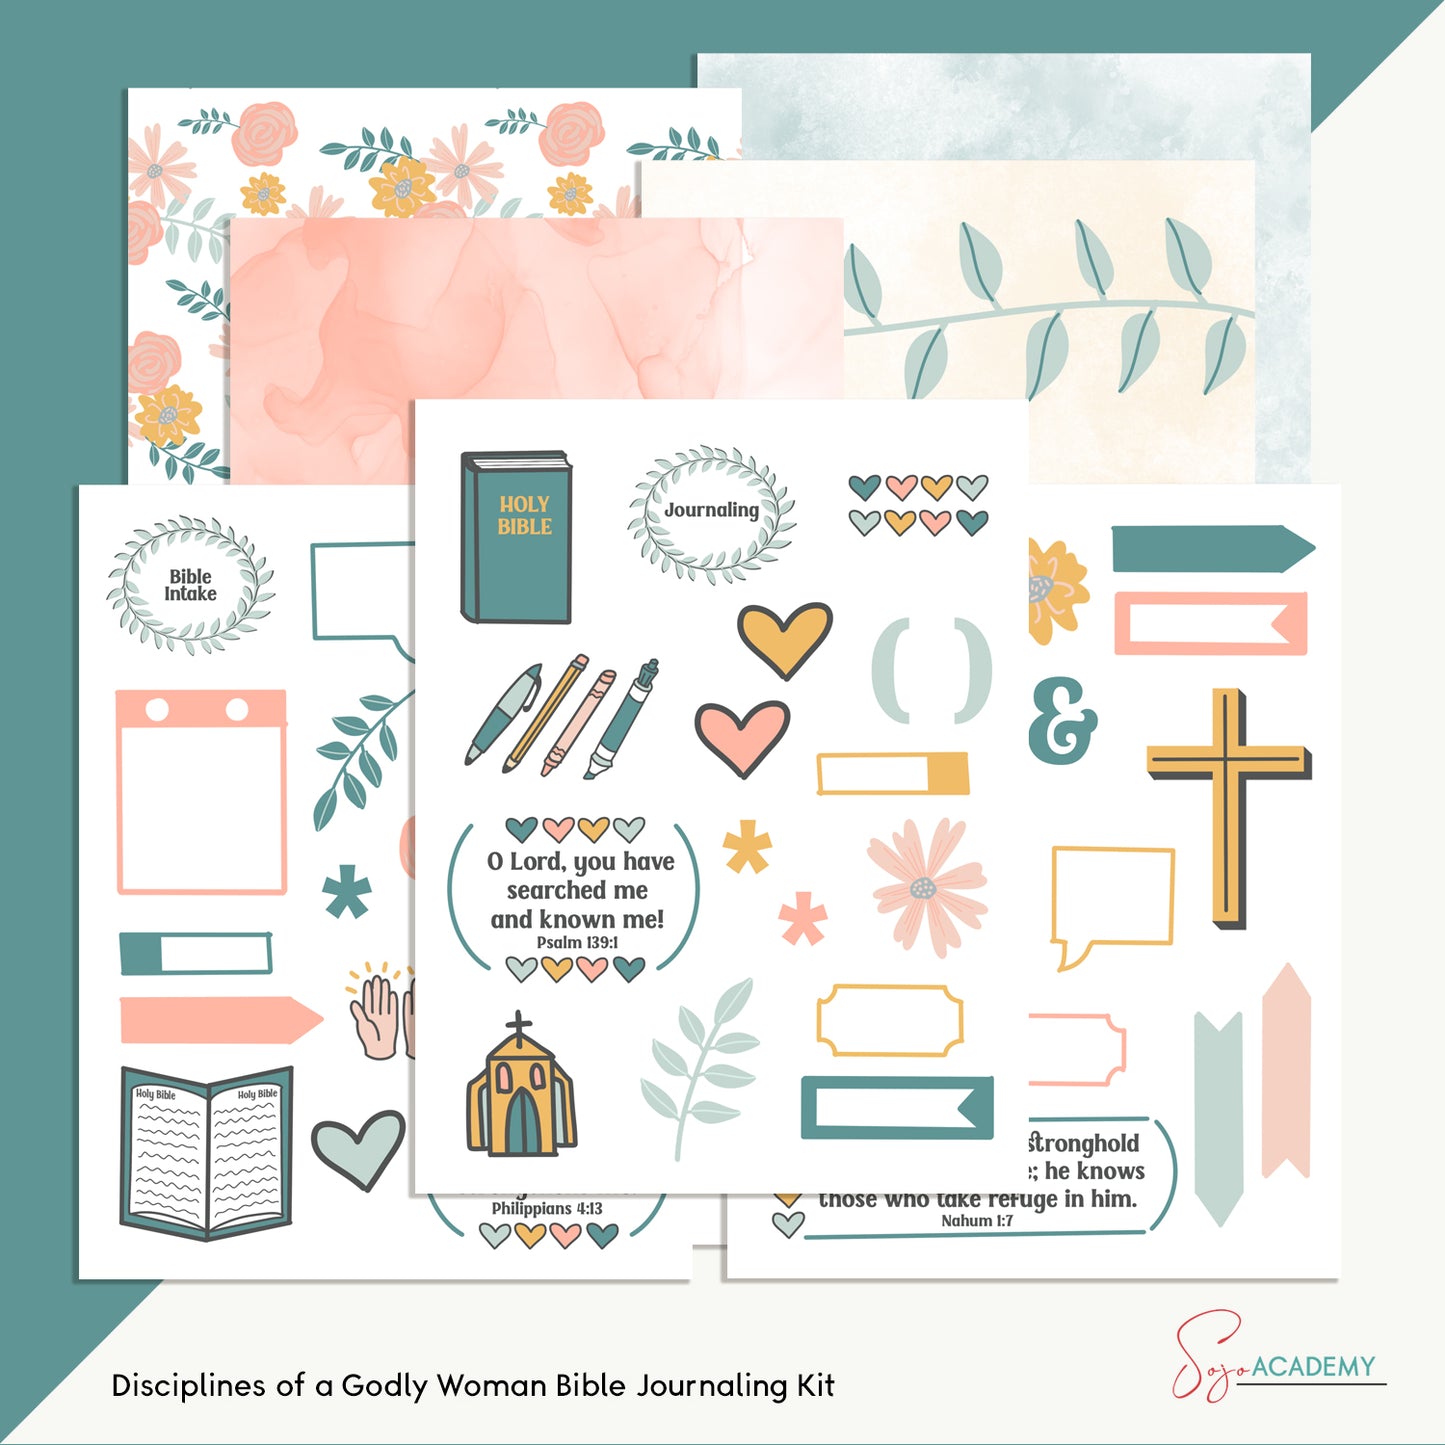 Disciplines of a Godly Woman Bible Journaling Kit